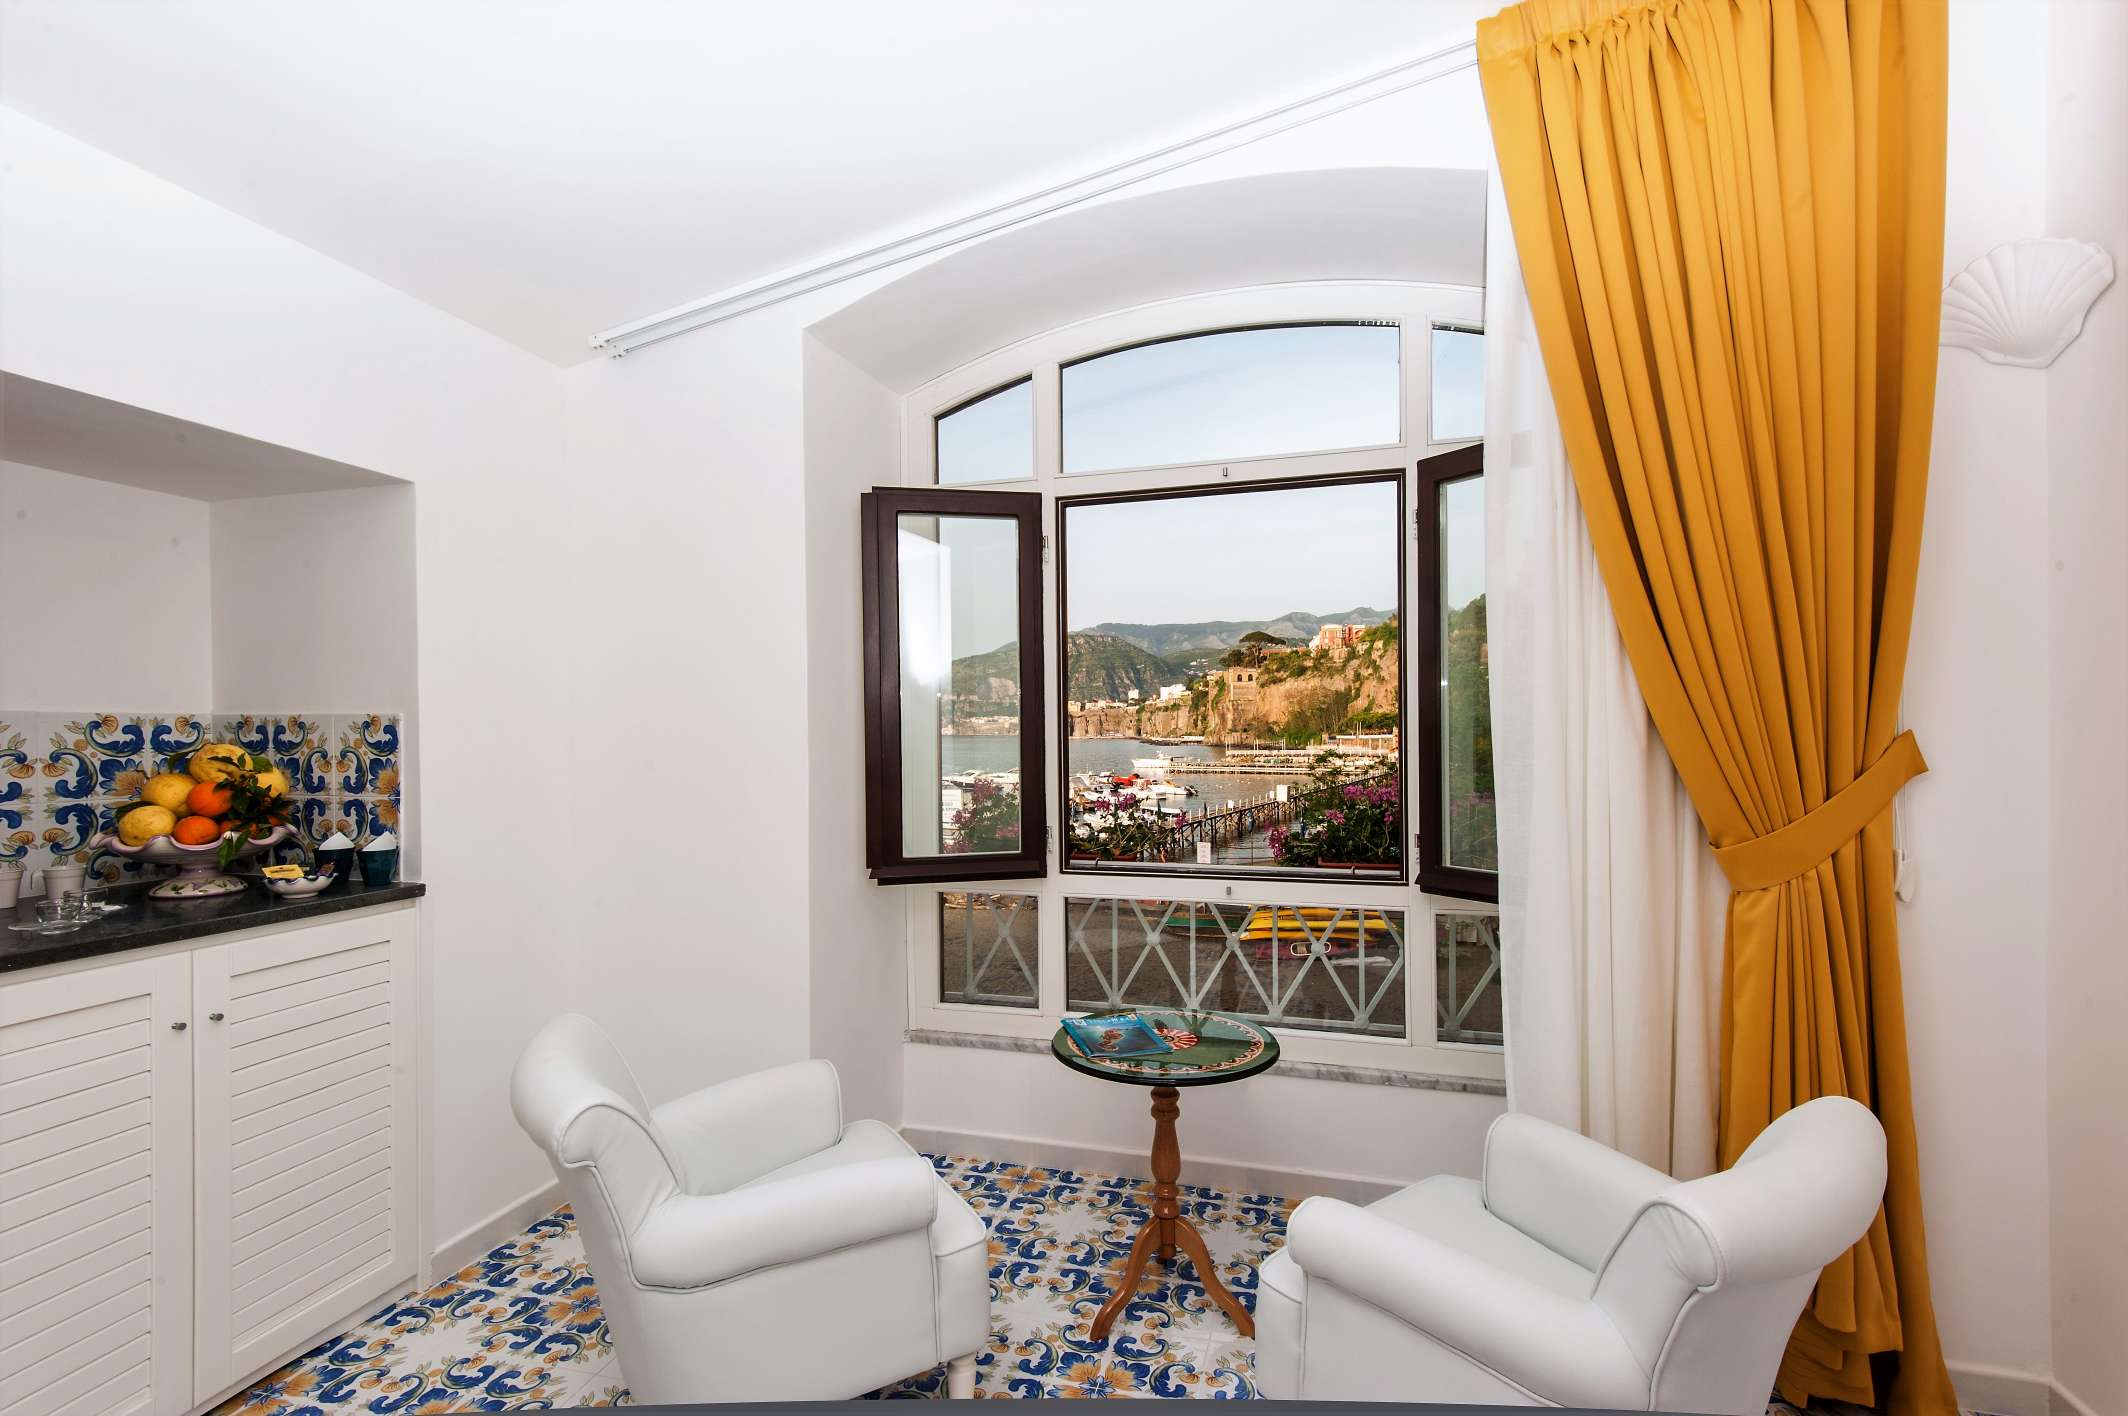 Sogno room of the Surriento Suites bed and breakfast in Sorrento